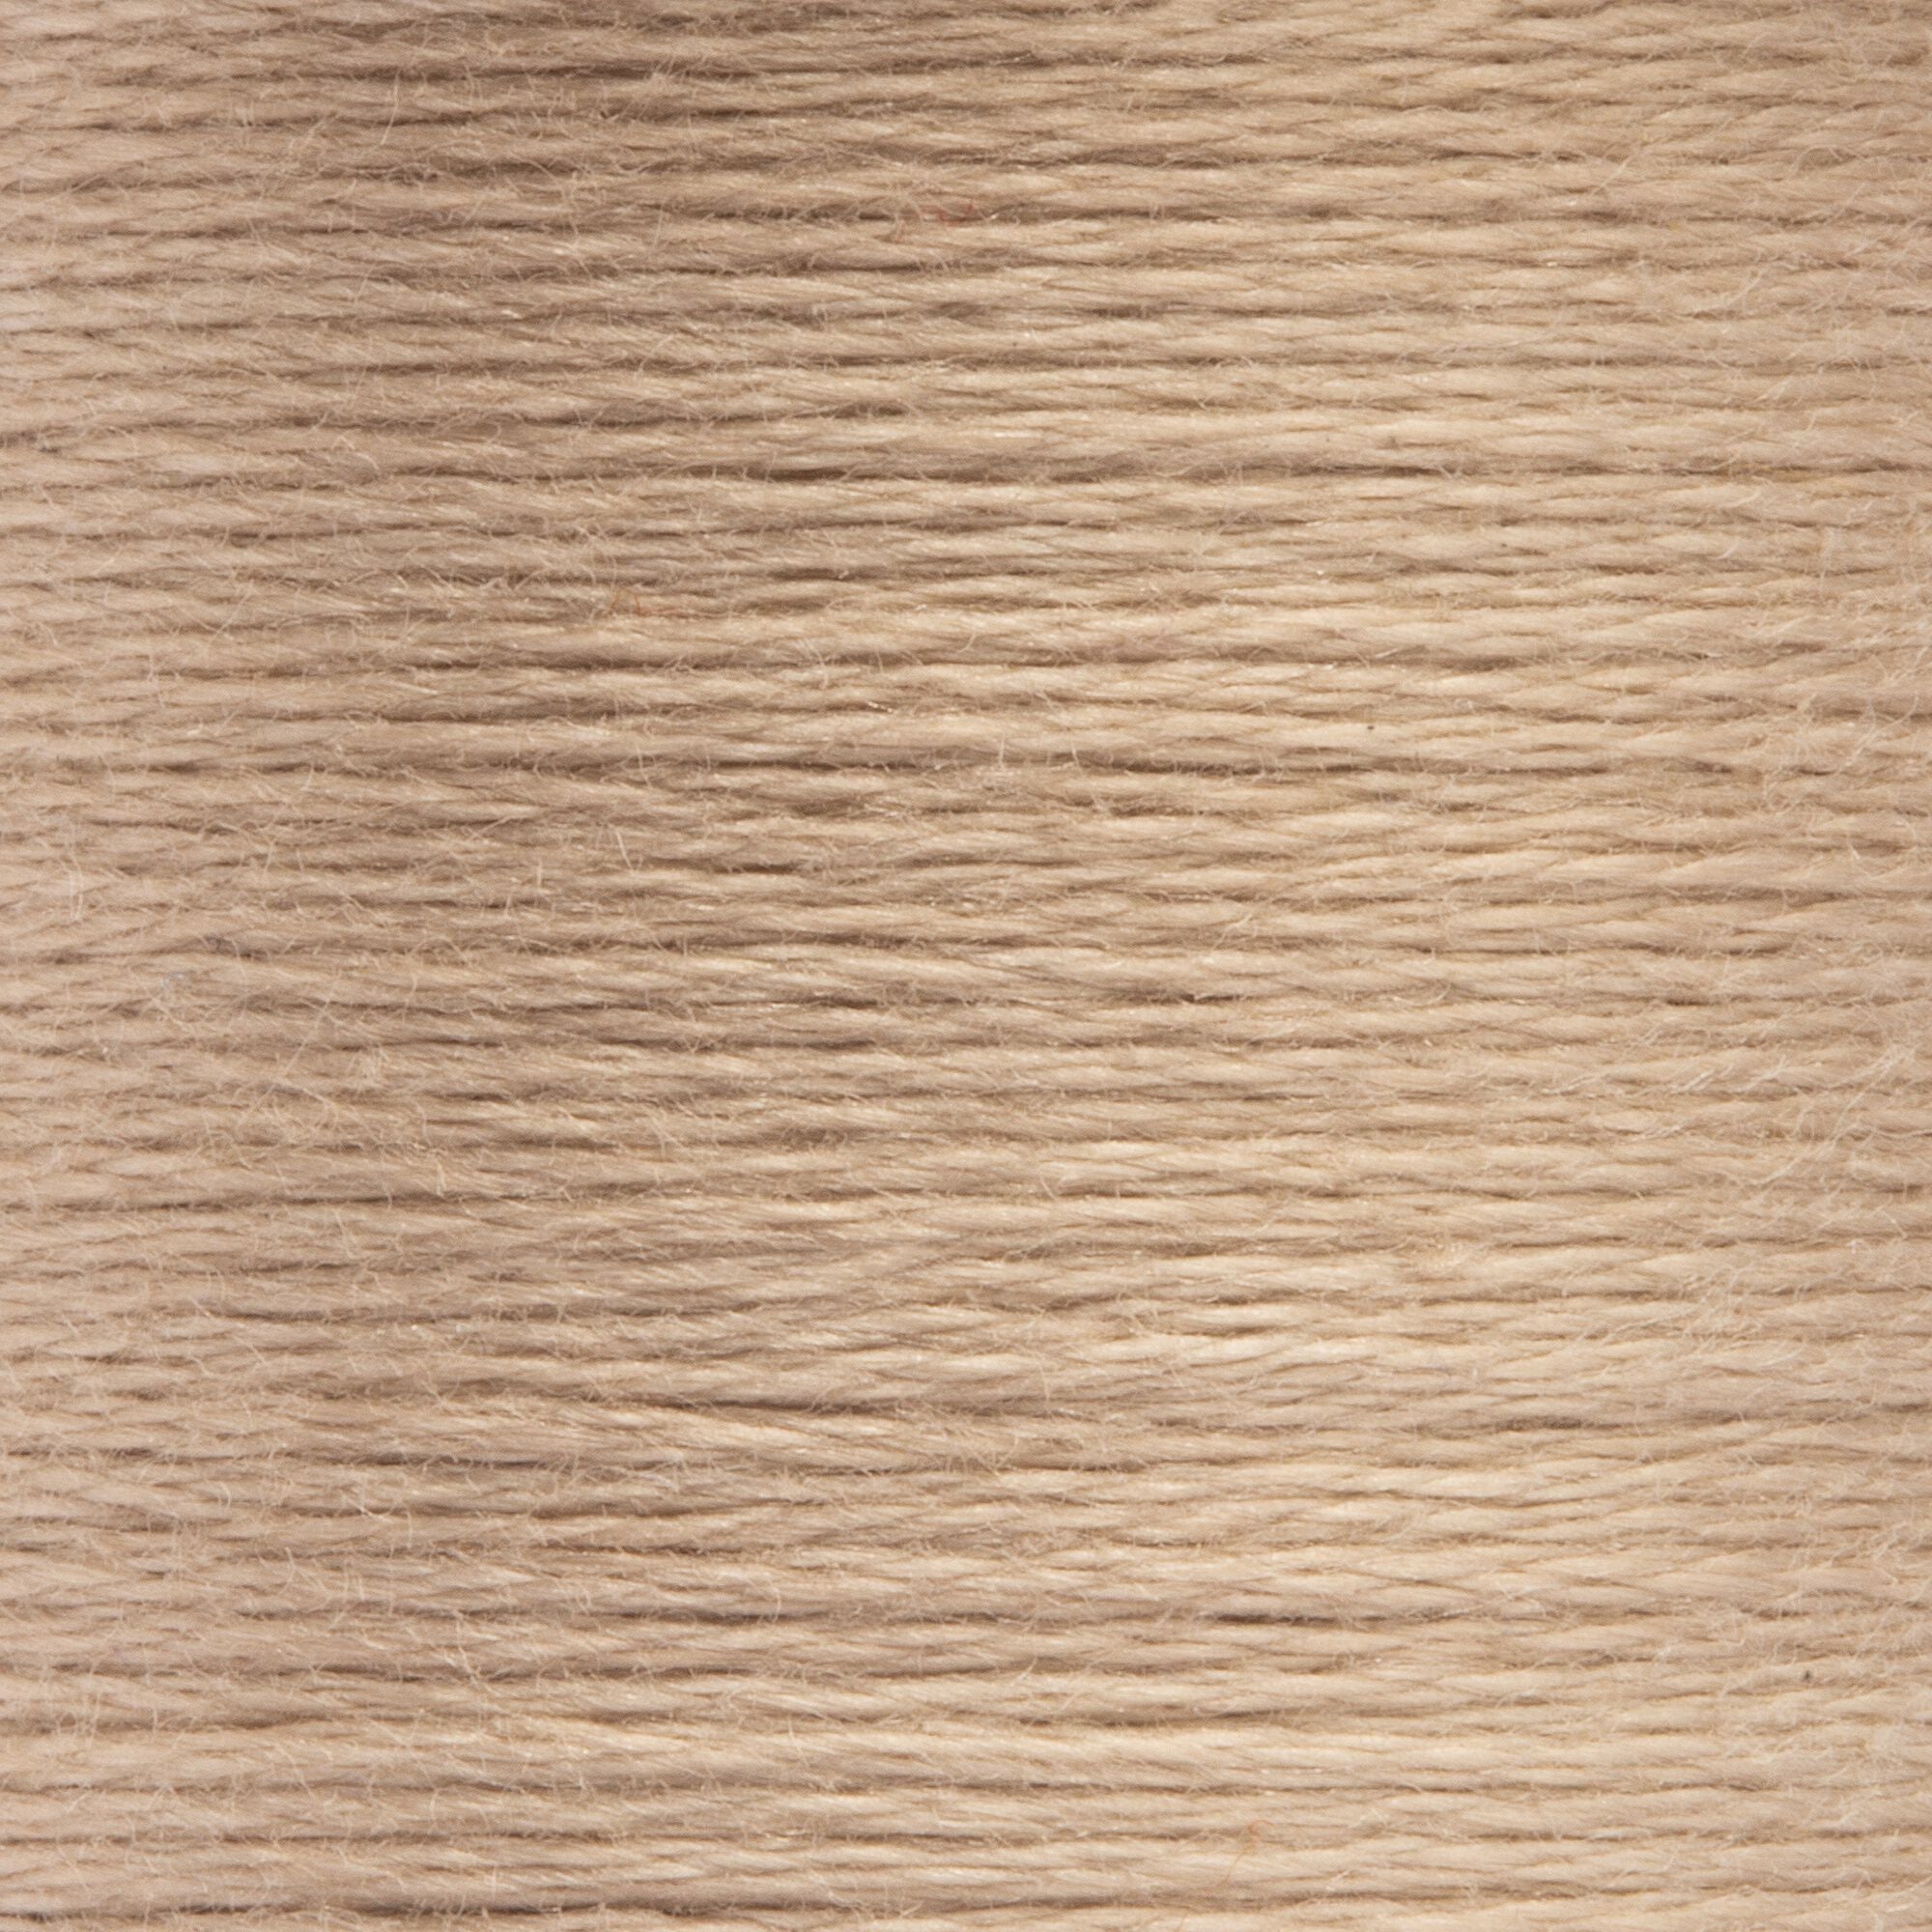 Anchor Embroidery Floss in Taupe Lt